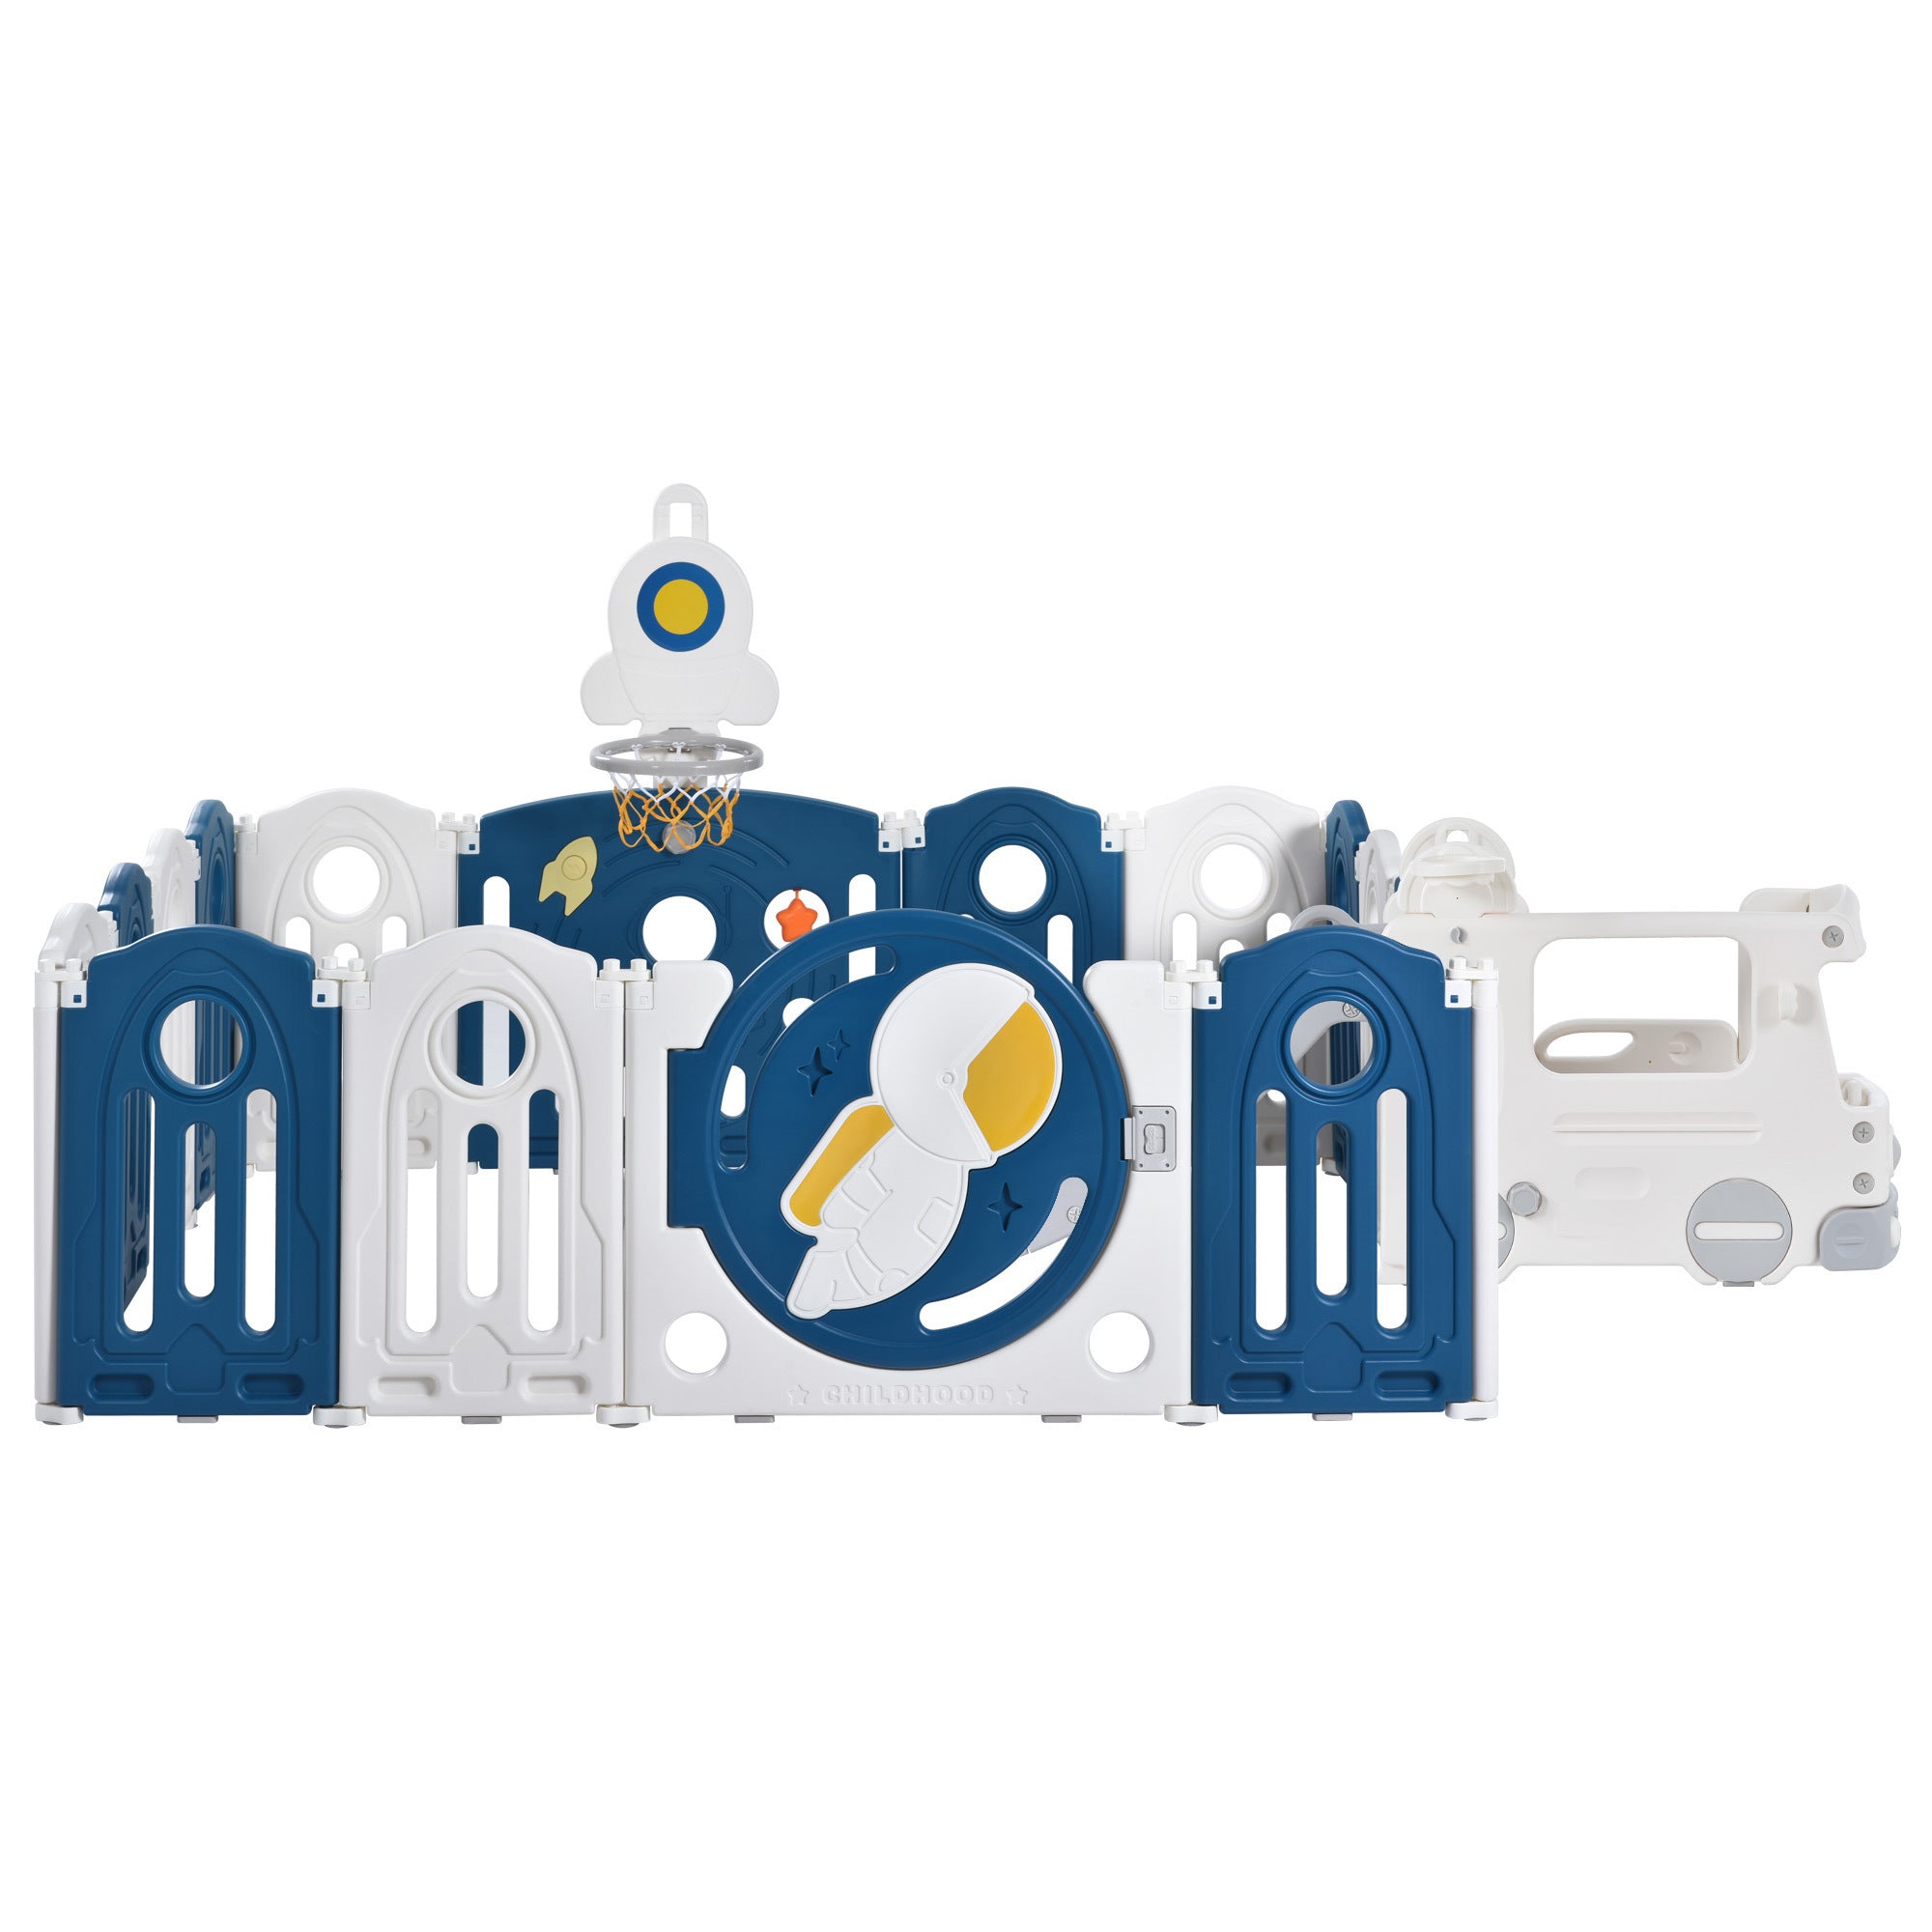 Baby Playpen for Toddler Astronaut Theme Set 1